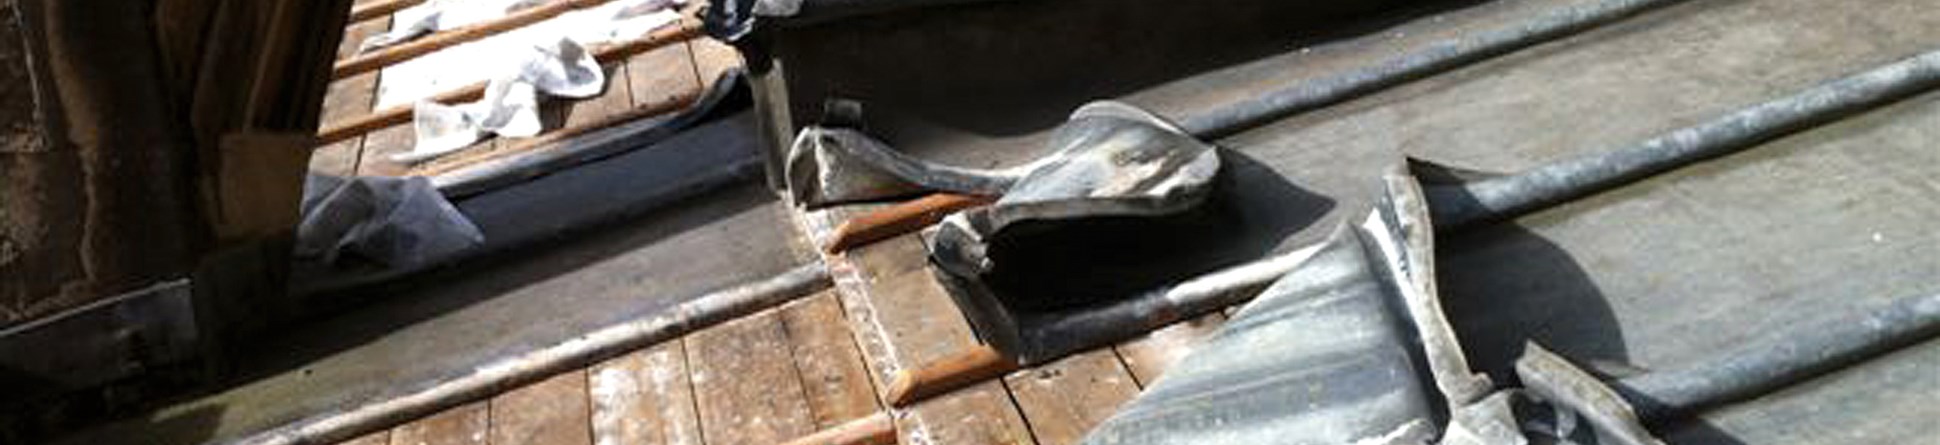 Image of the damage caused by metal theft from the roof of a historic place of worship.